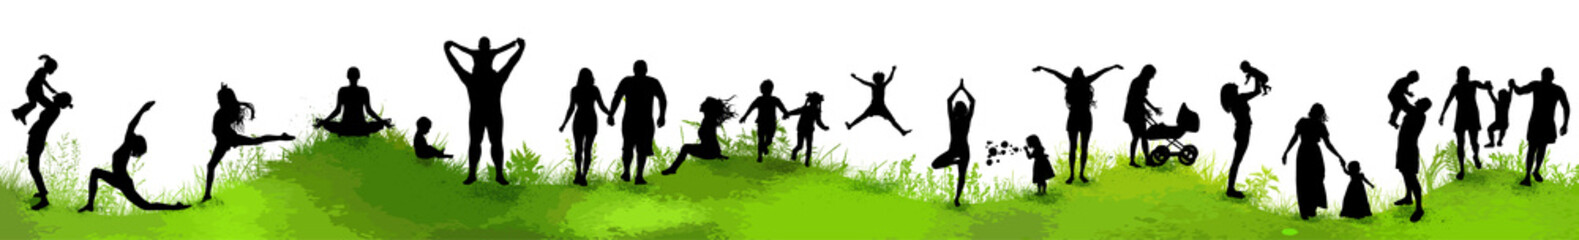 Family in nature. Silhouettes of people on the grass. Vector illustration